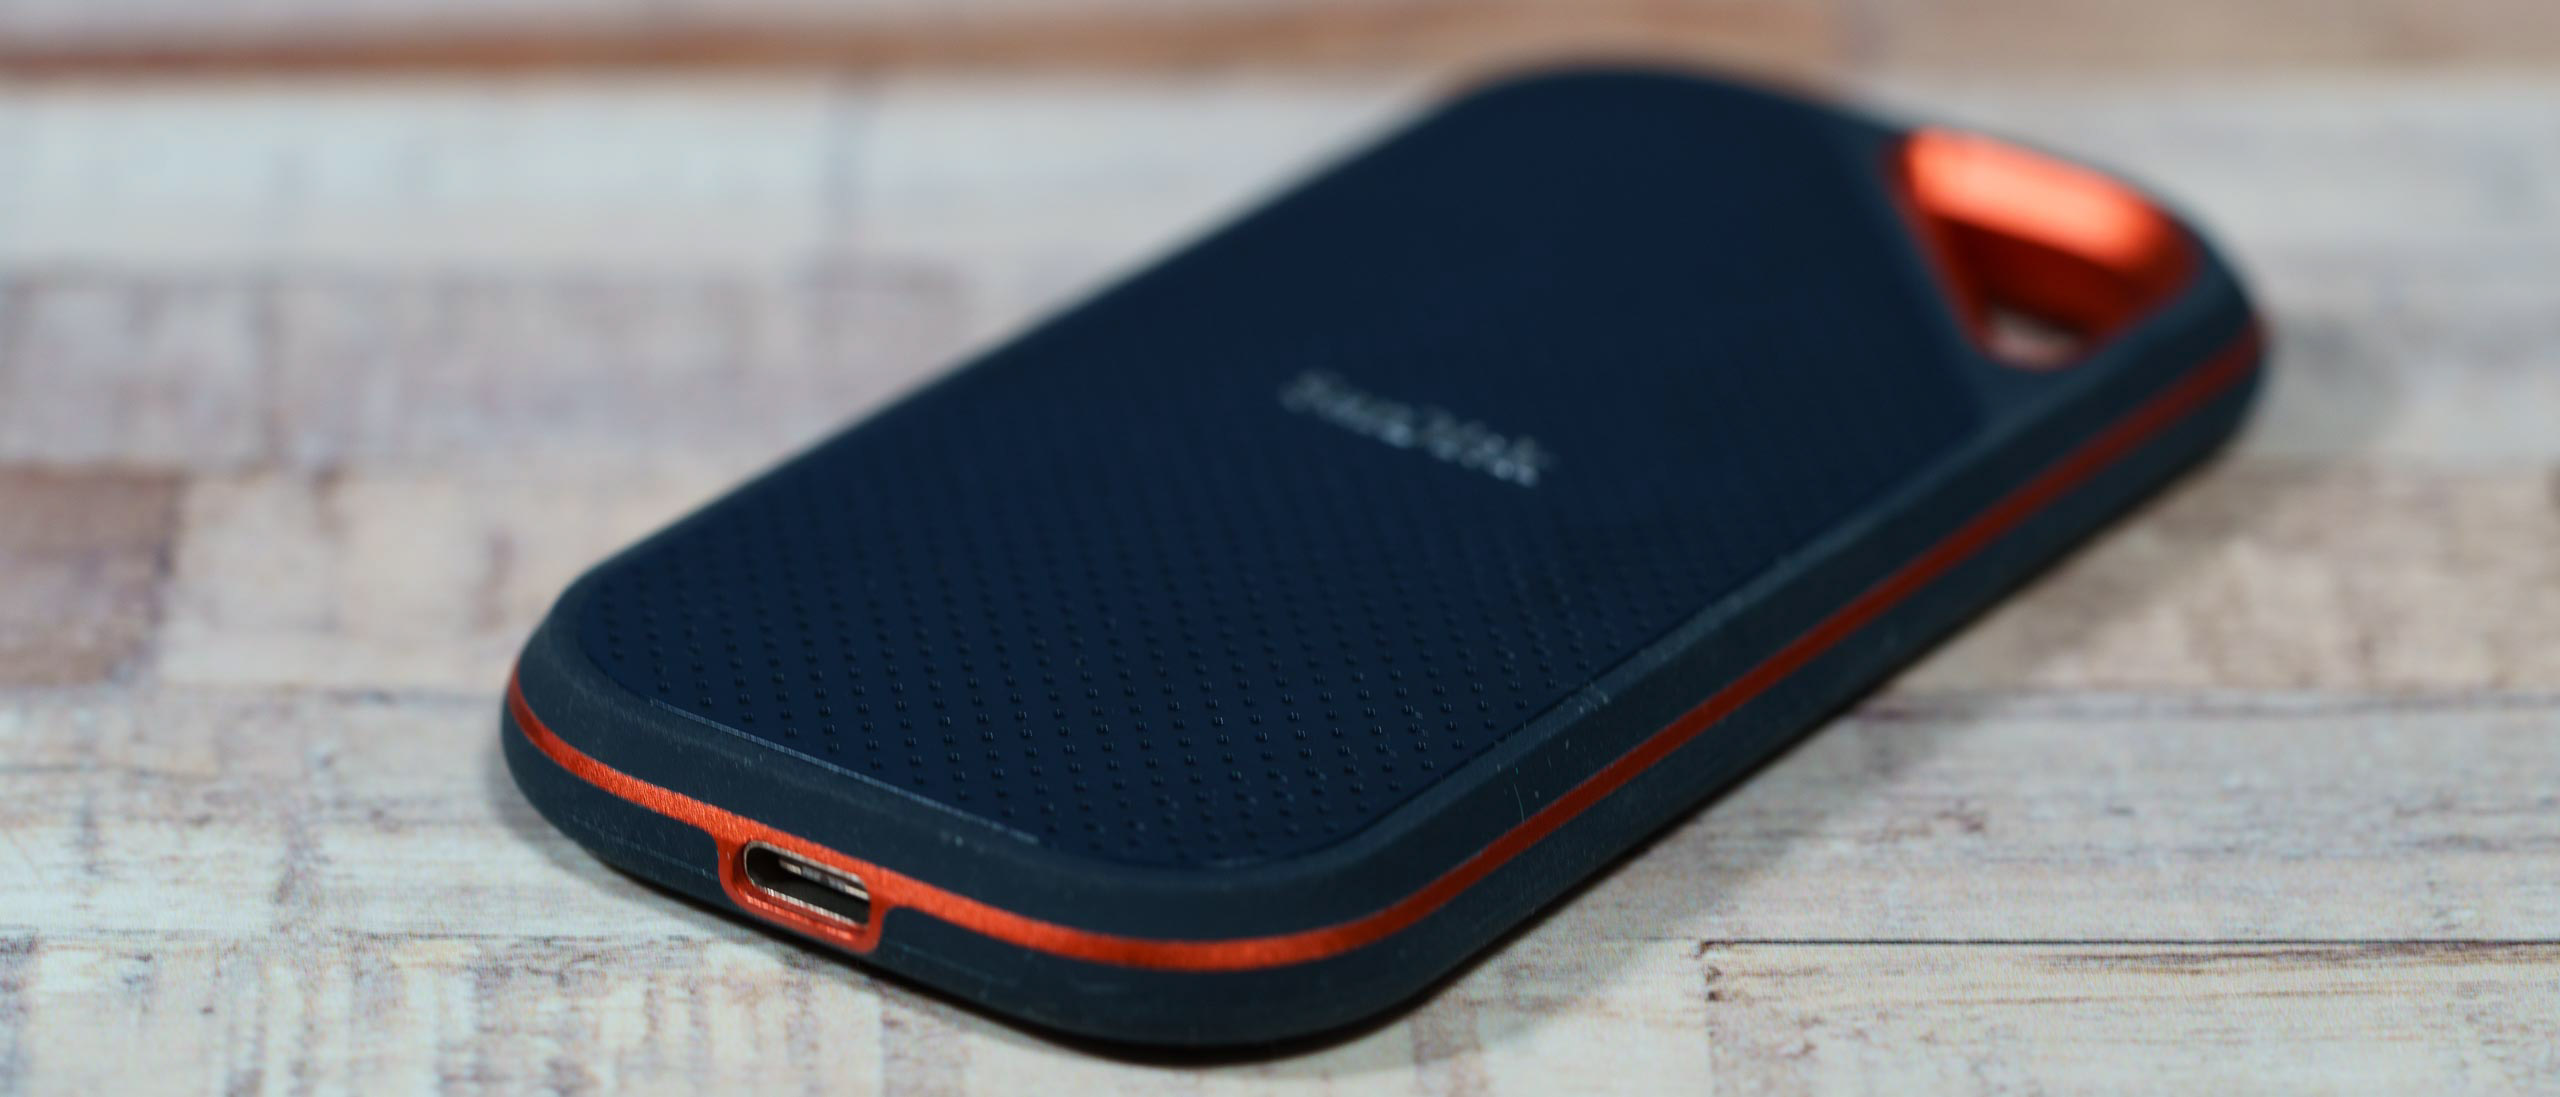 SanDisk Extreme Pro Portable SSD review: Fast, tough and reasonably priced